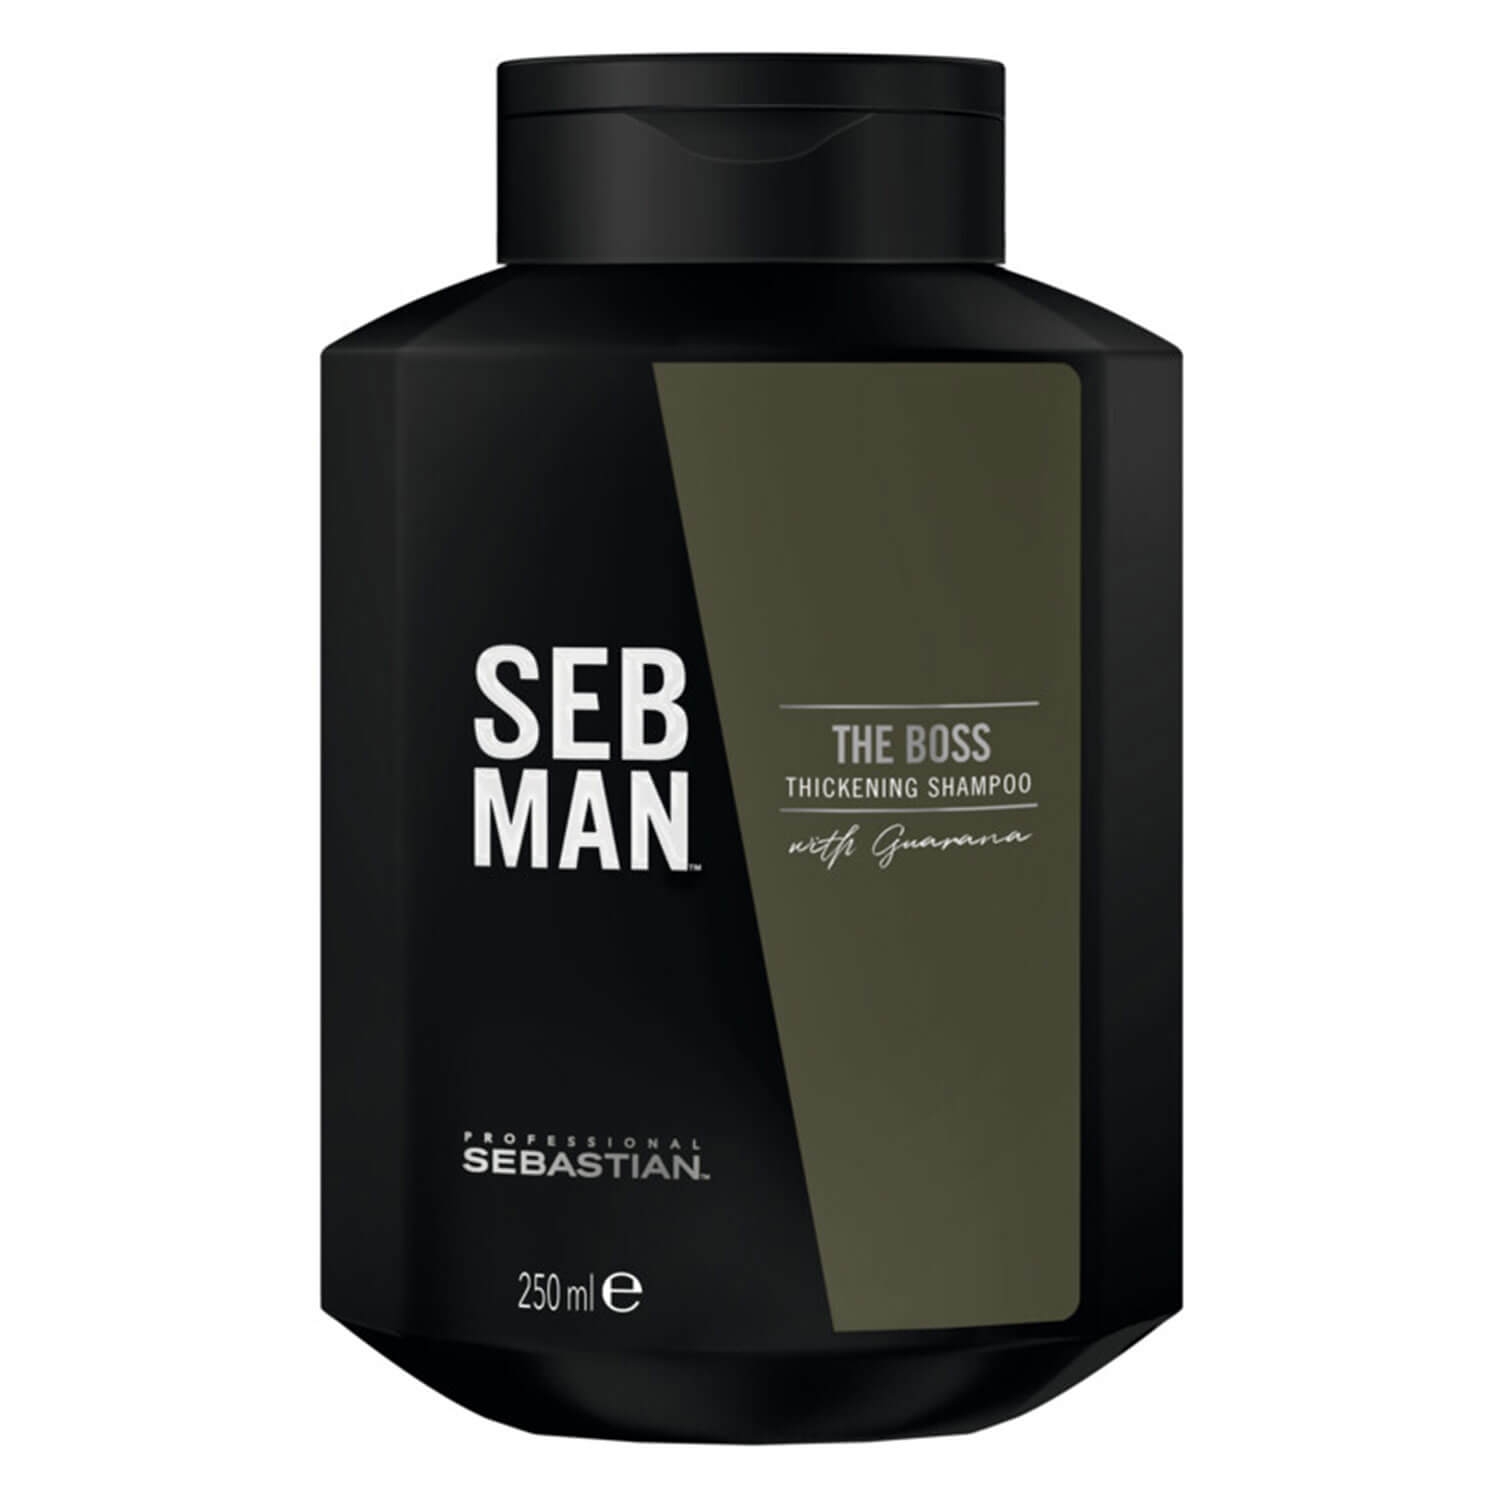 Product image from SEB MAN - The Boss Thickening Shampoo